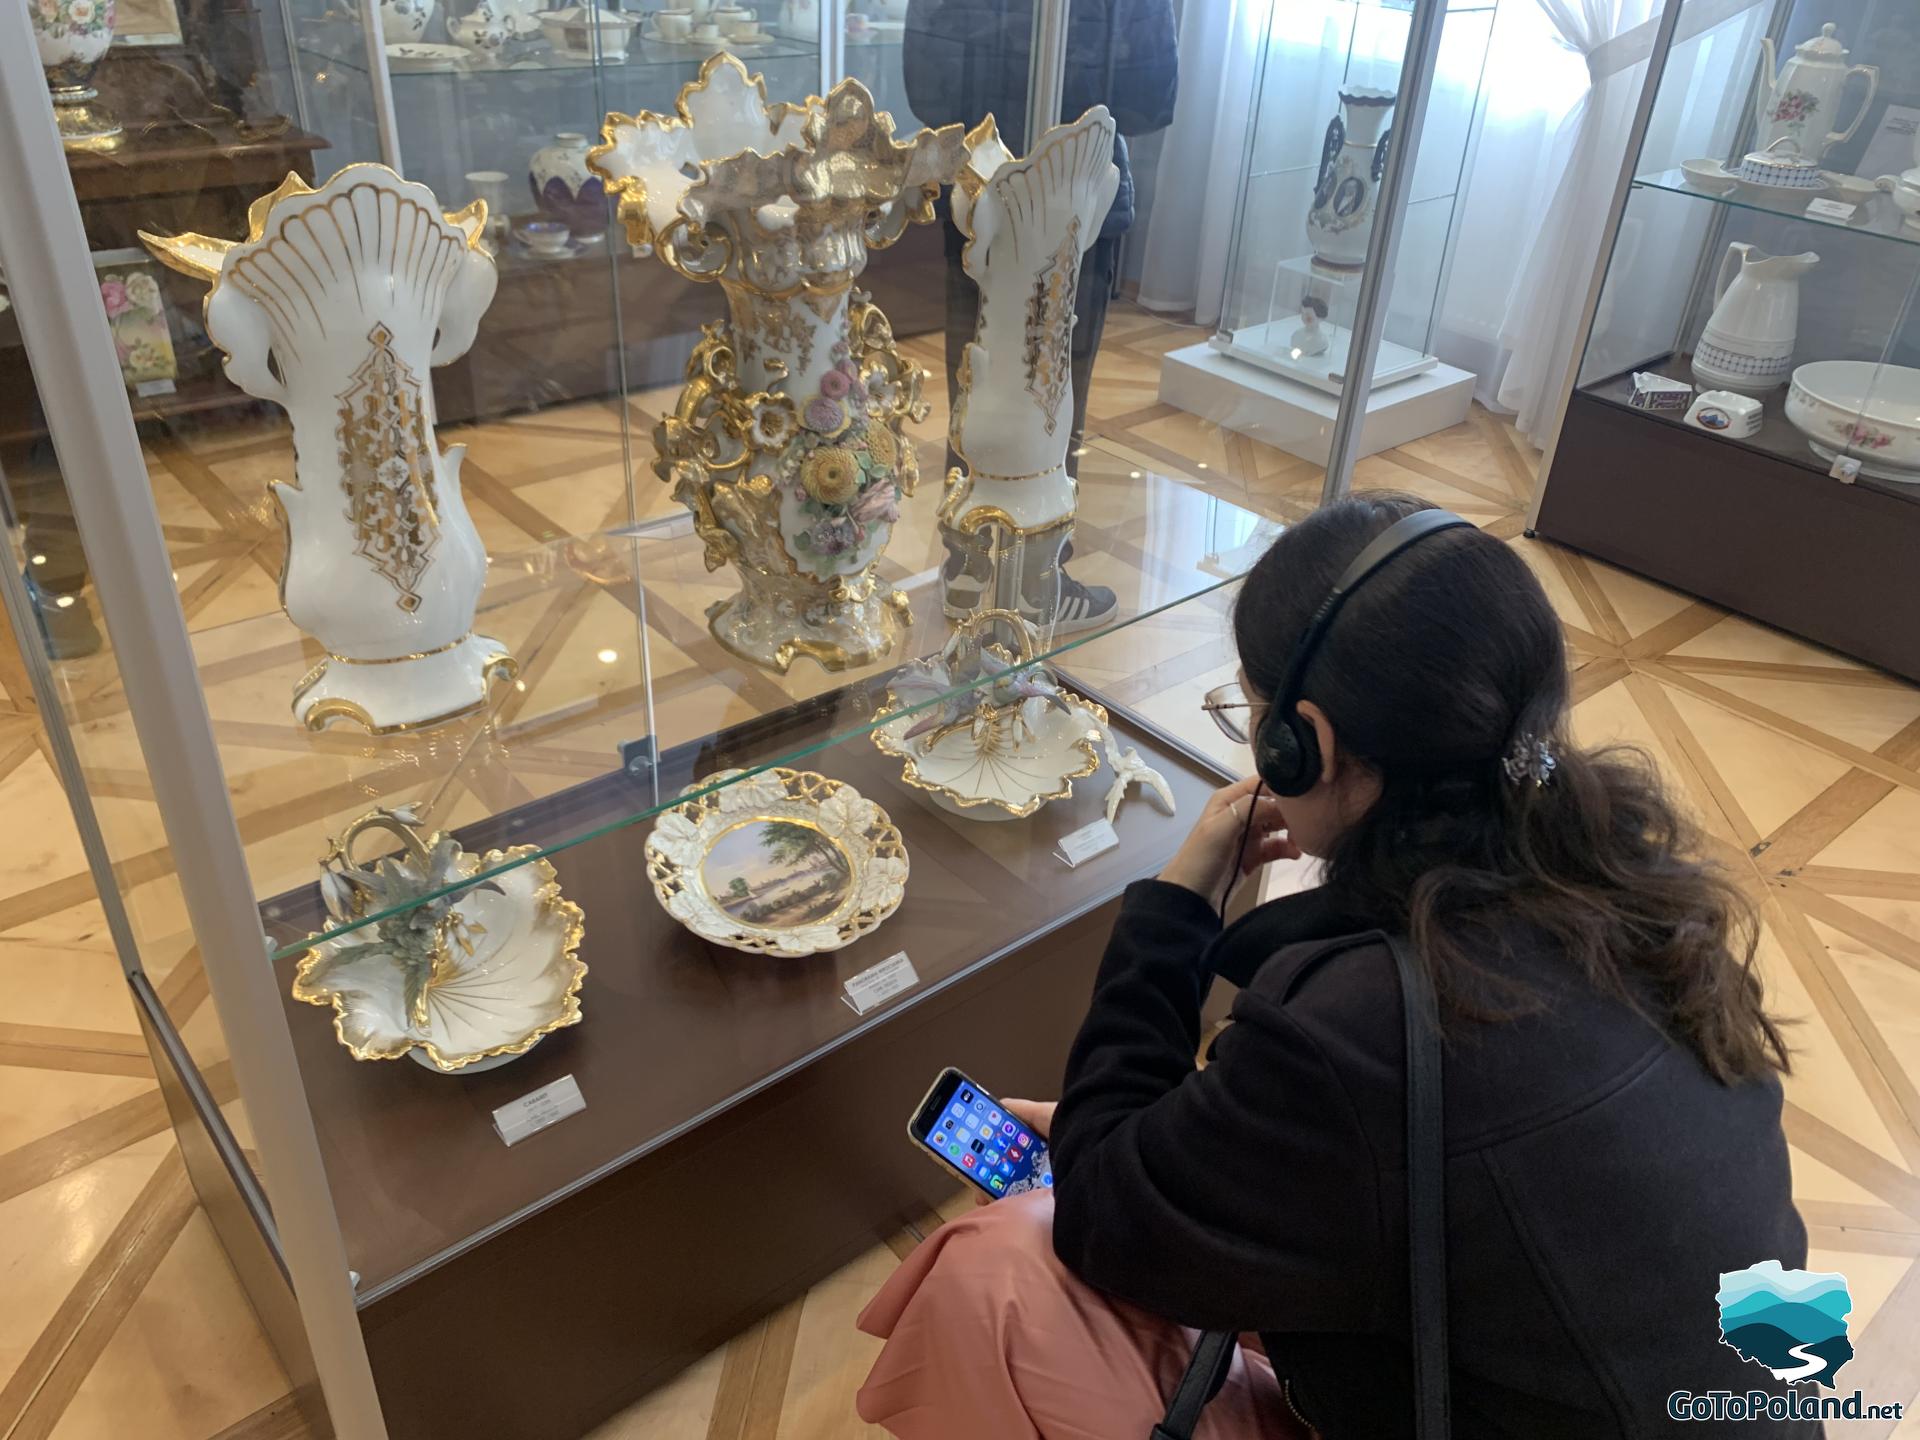 a woman looking at the porcelain items